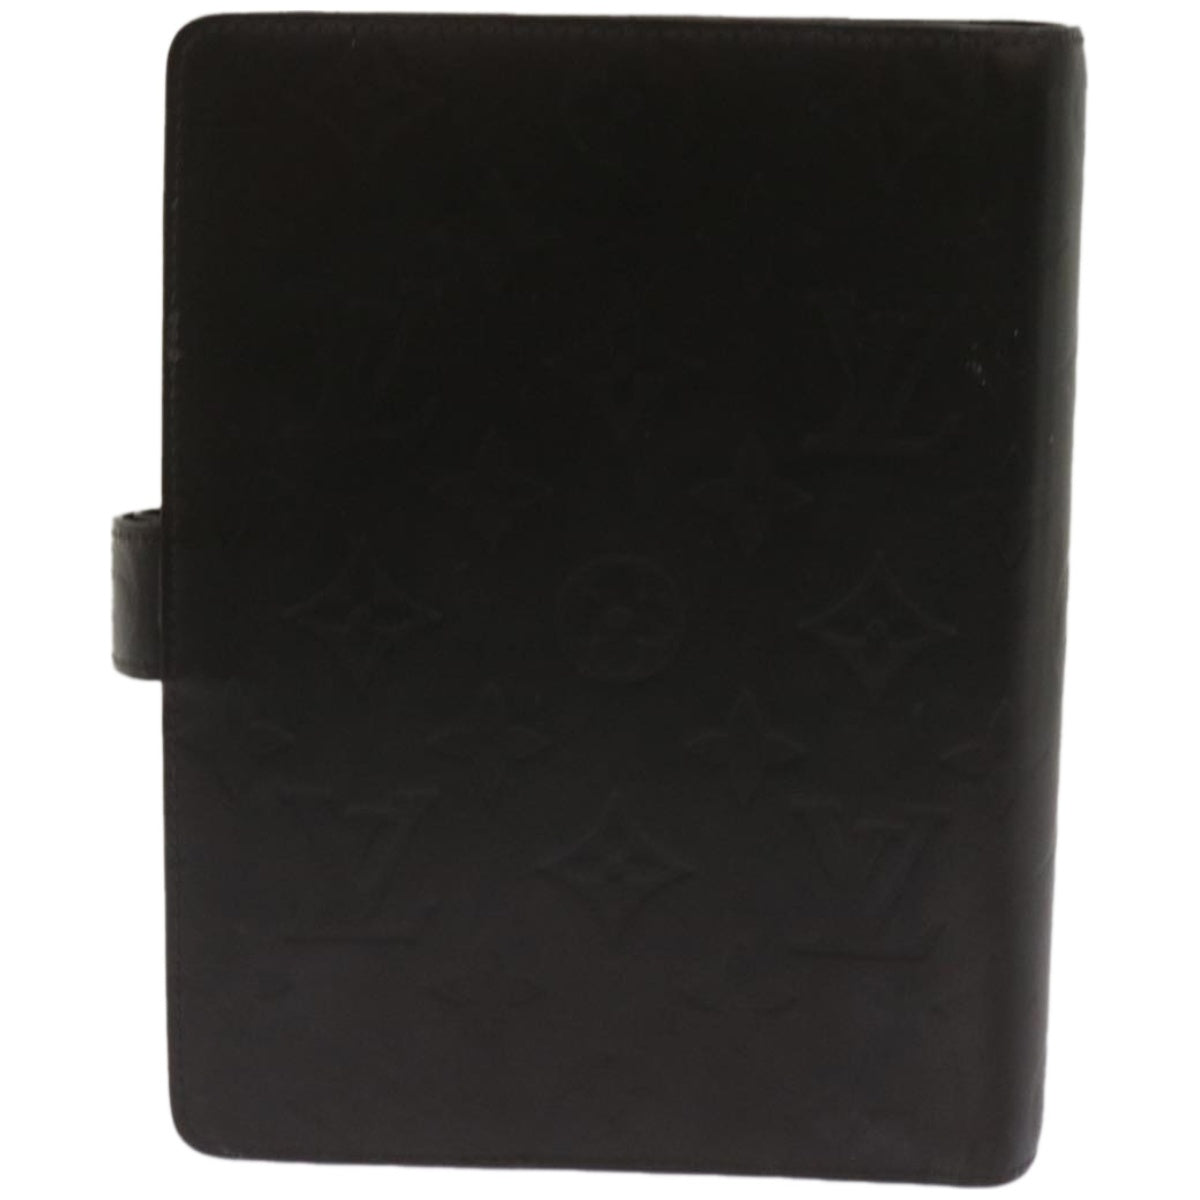 Pre-owned Louis Vuitton Agenda Pm Brown Leather Wallet  ()